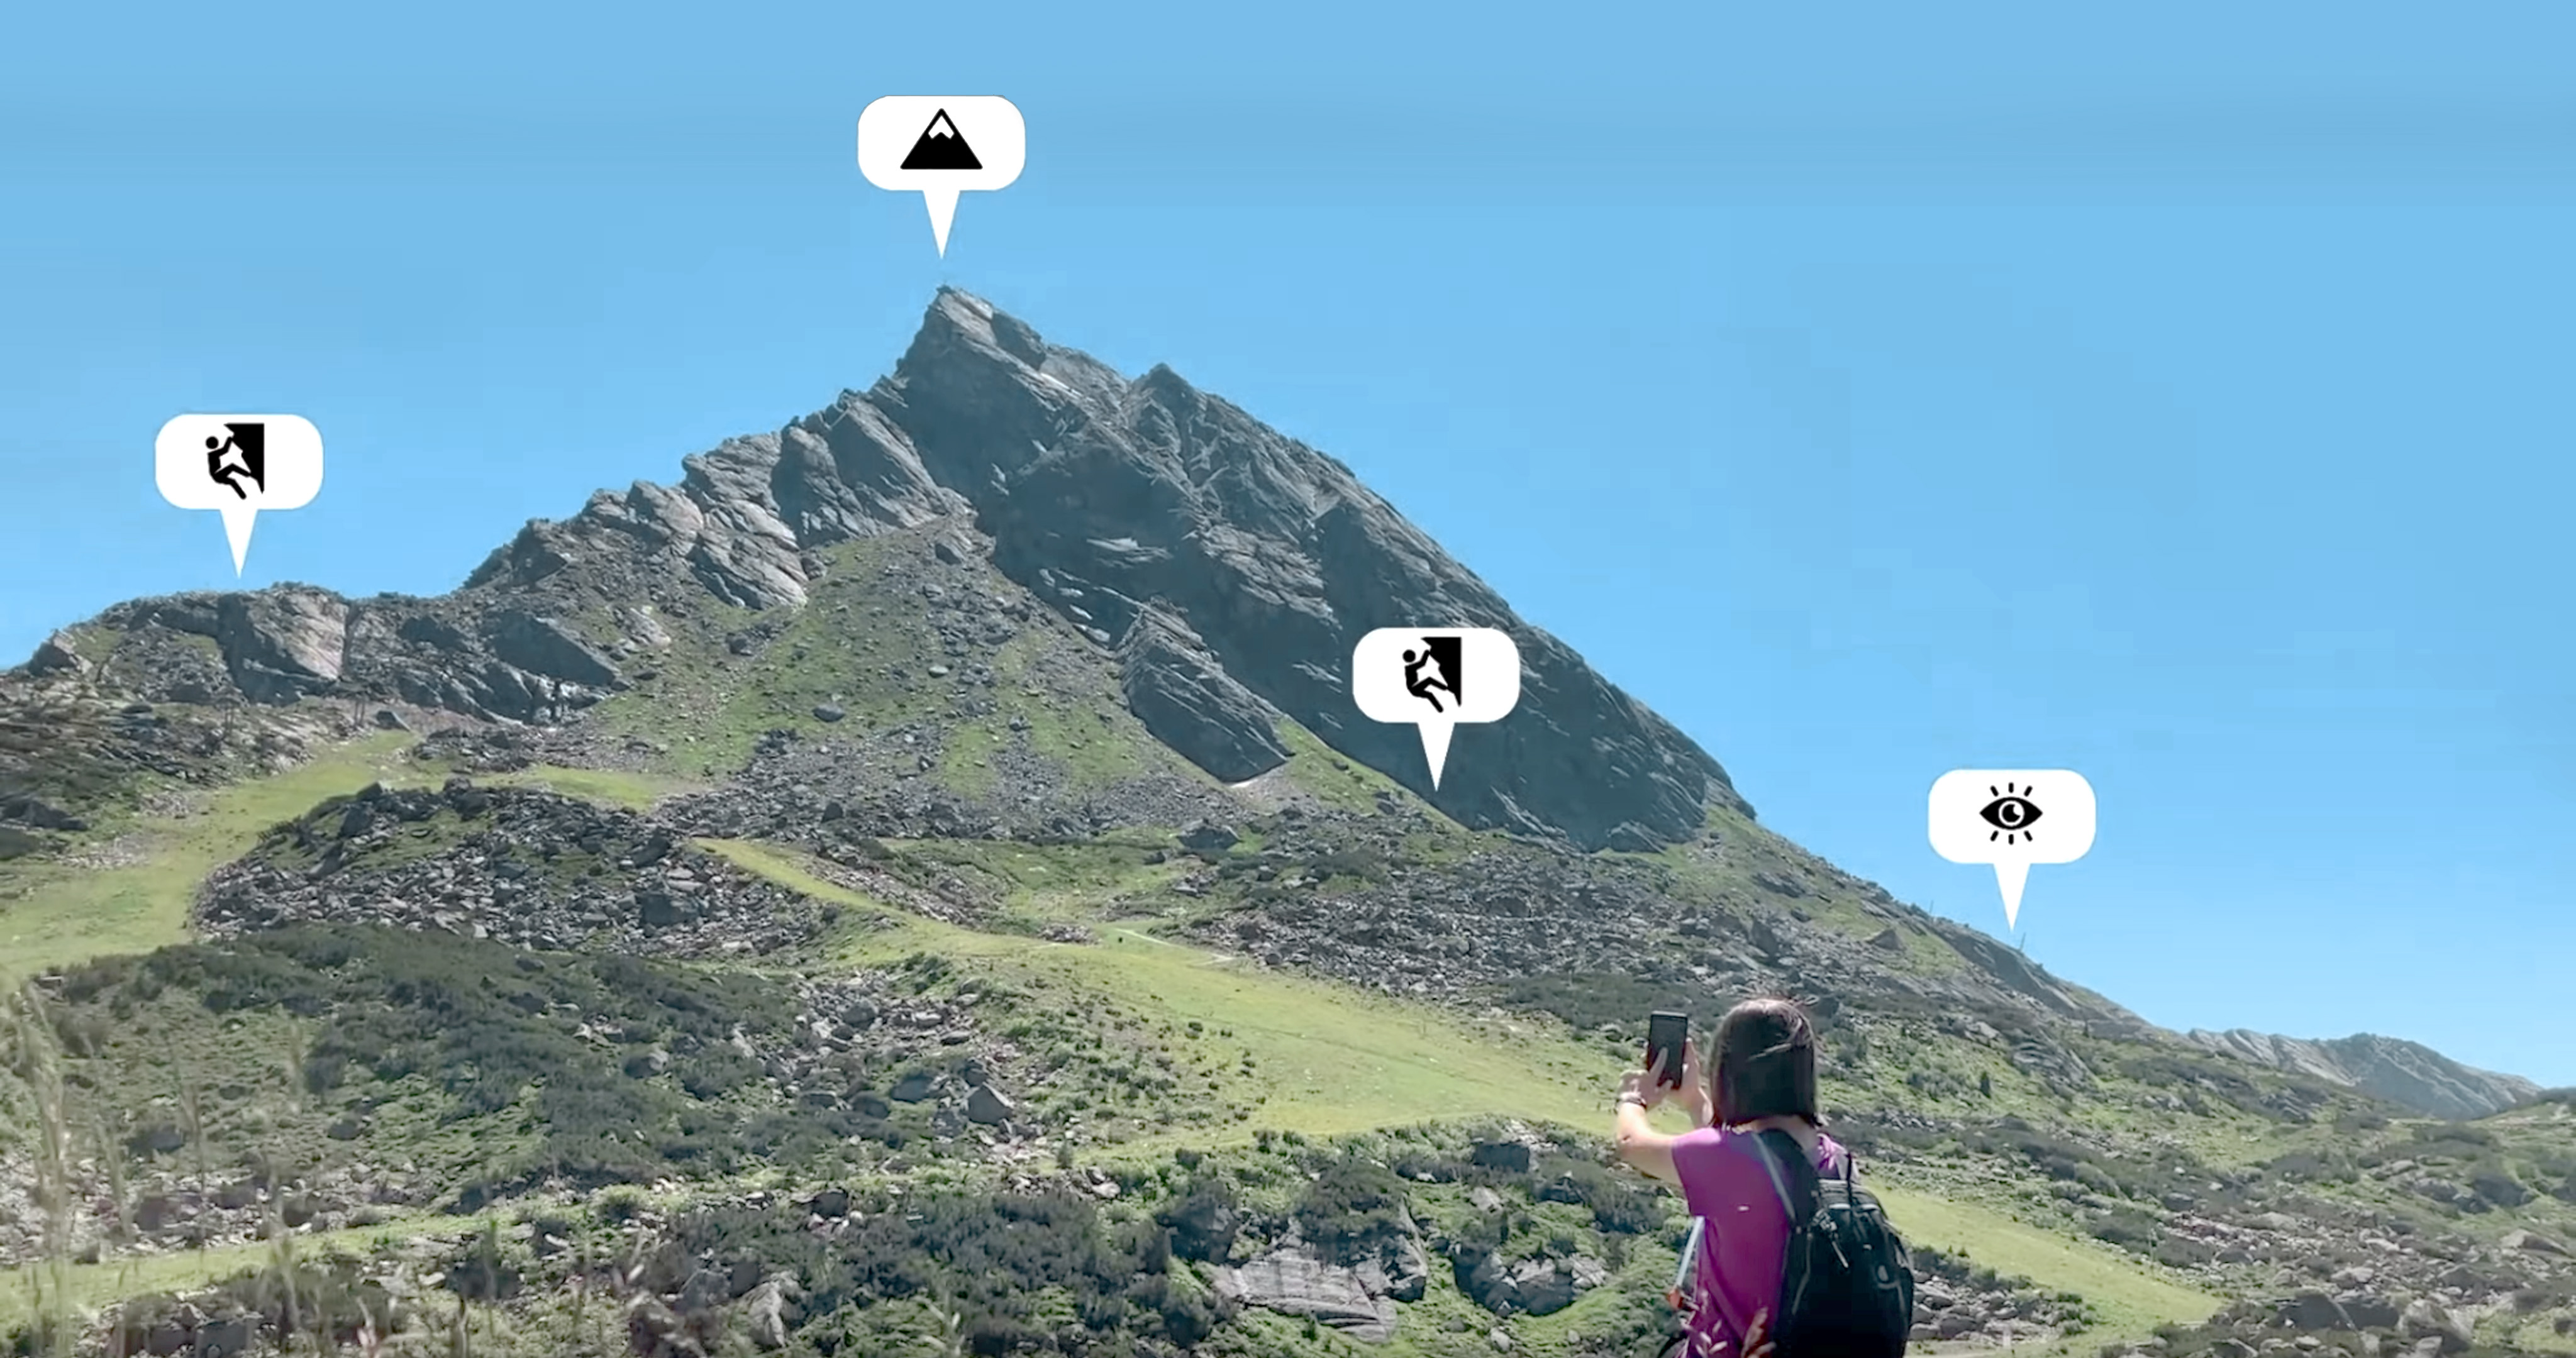 TrailView AR is an autmented reality app to show points of interest while hiking